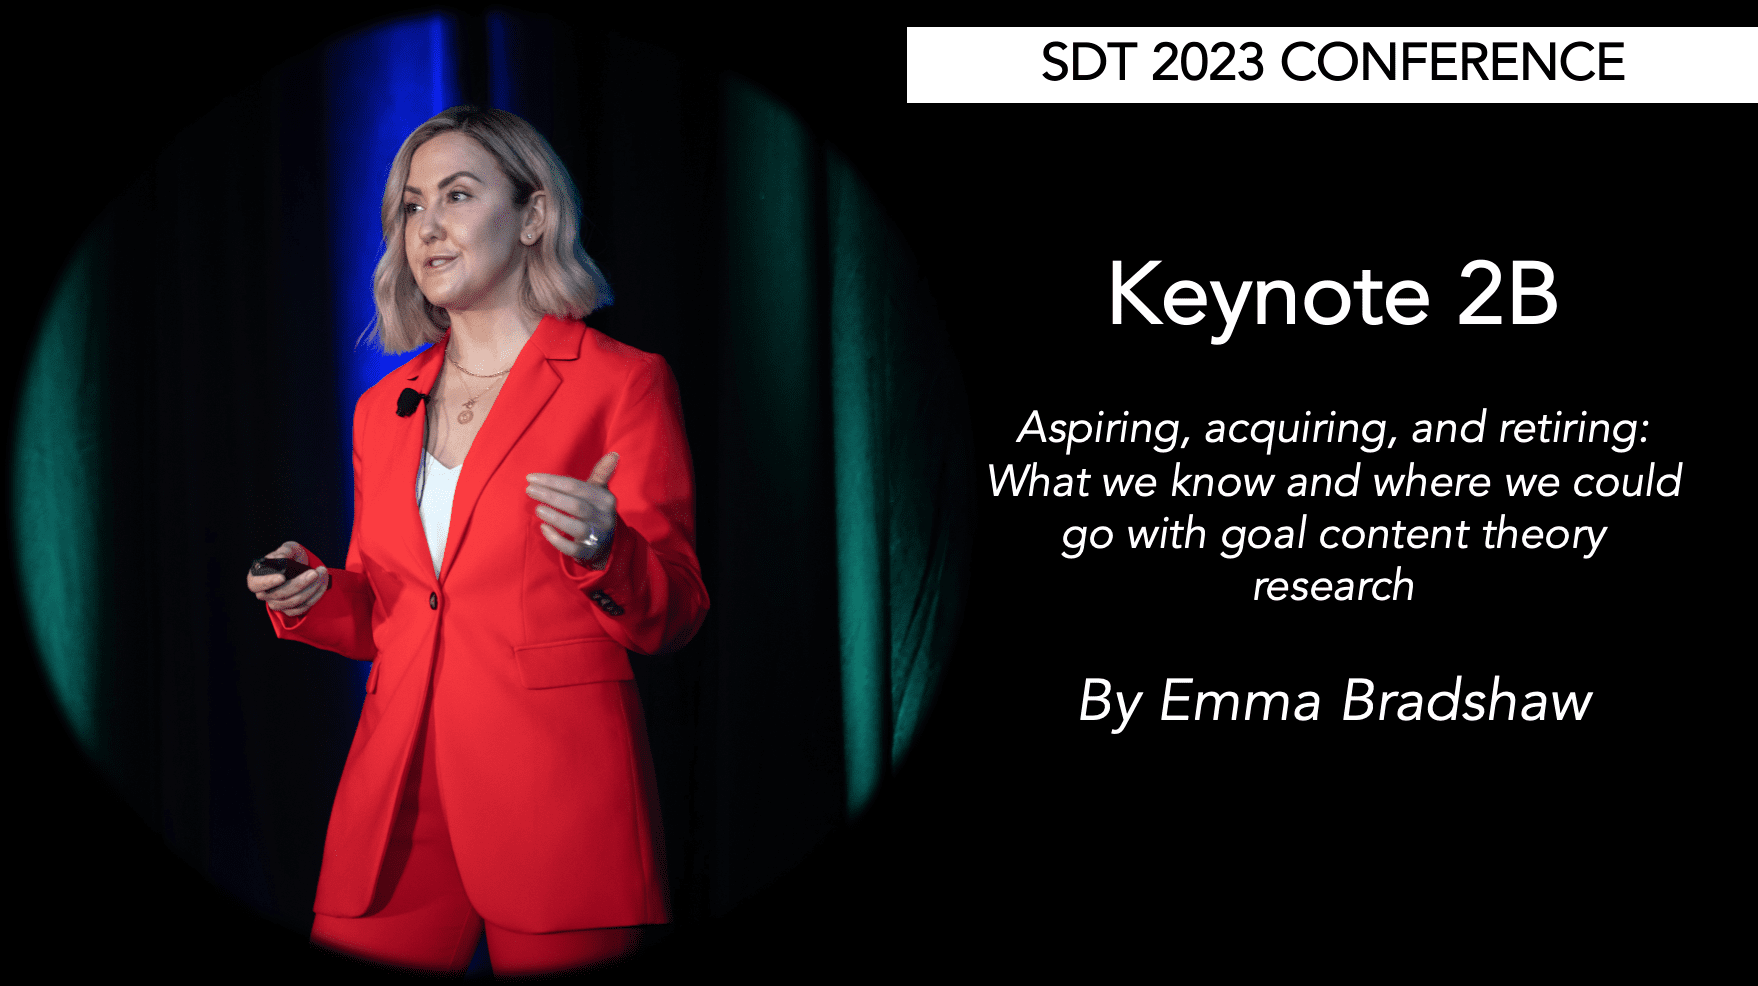 Aspiring acquiring and retiring What we know and where we could go with goal content theory research  Emma Bradshaw keynote  SDT2023